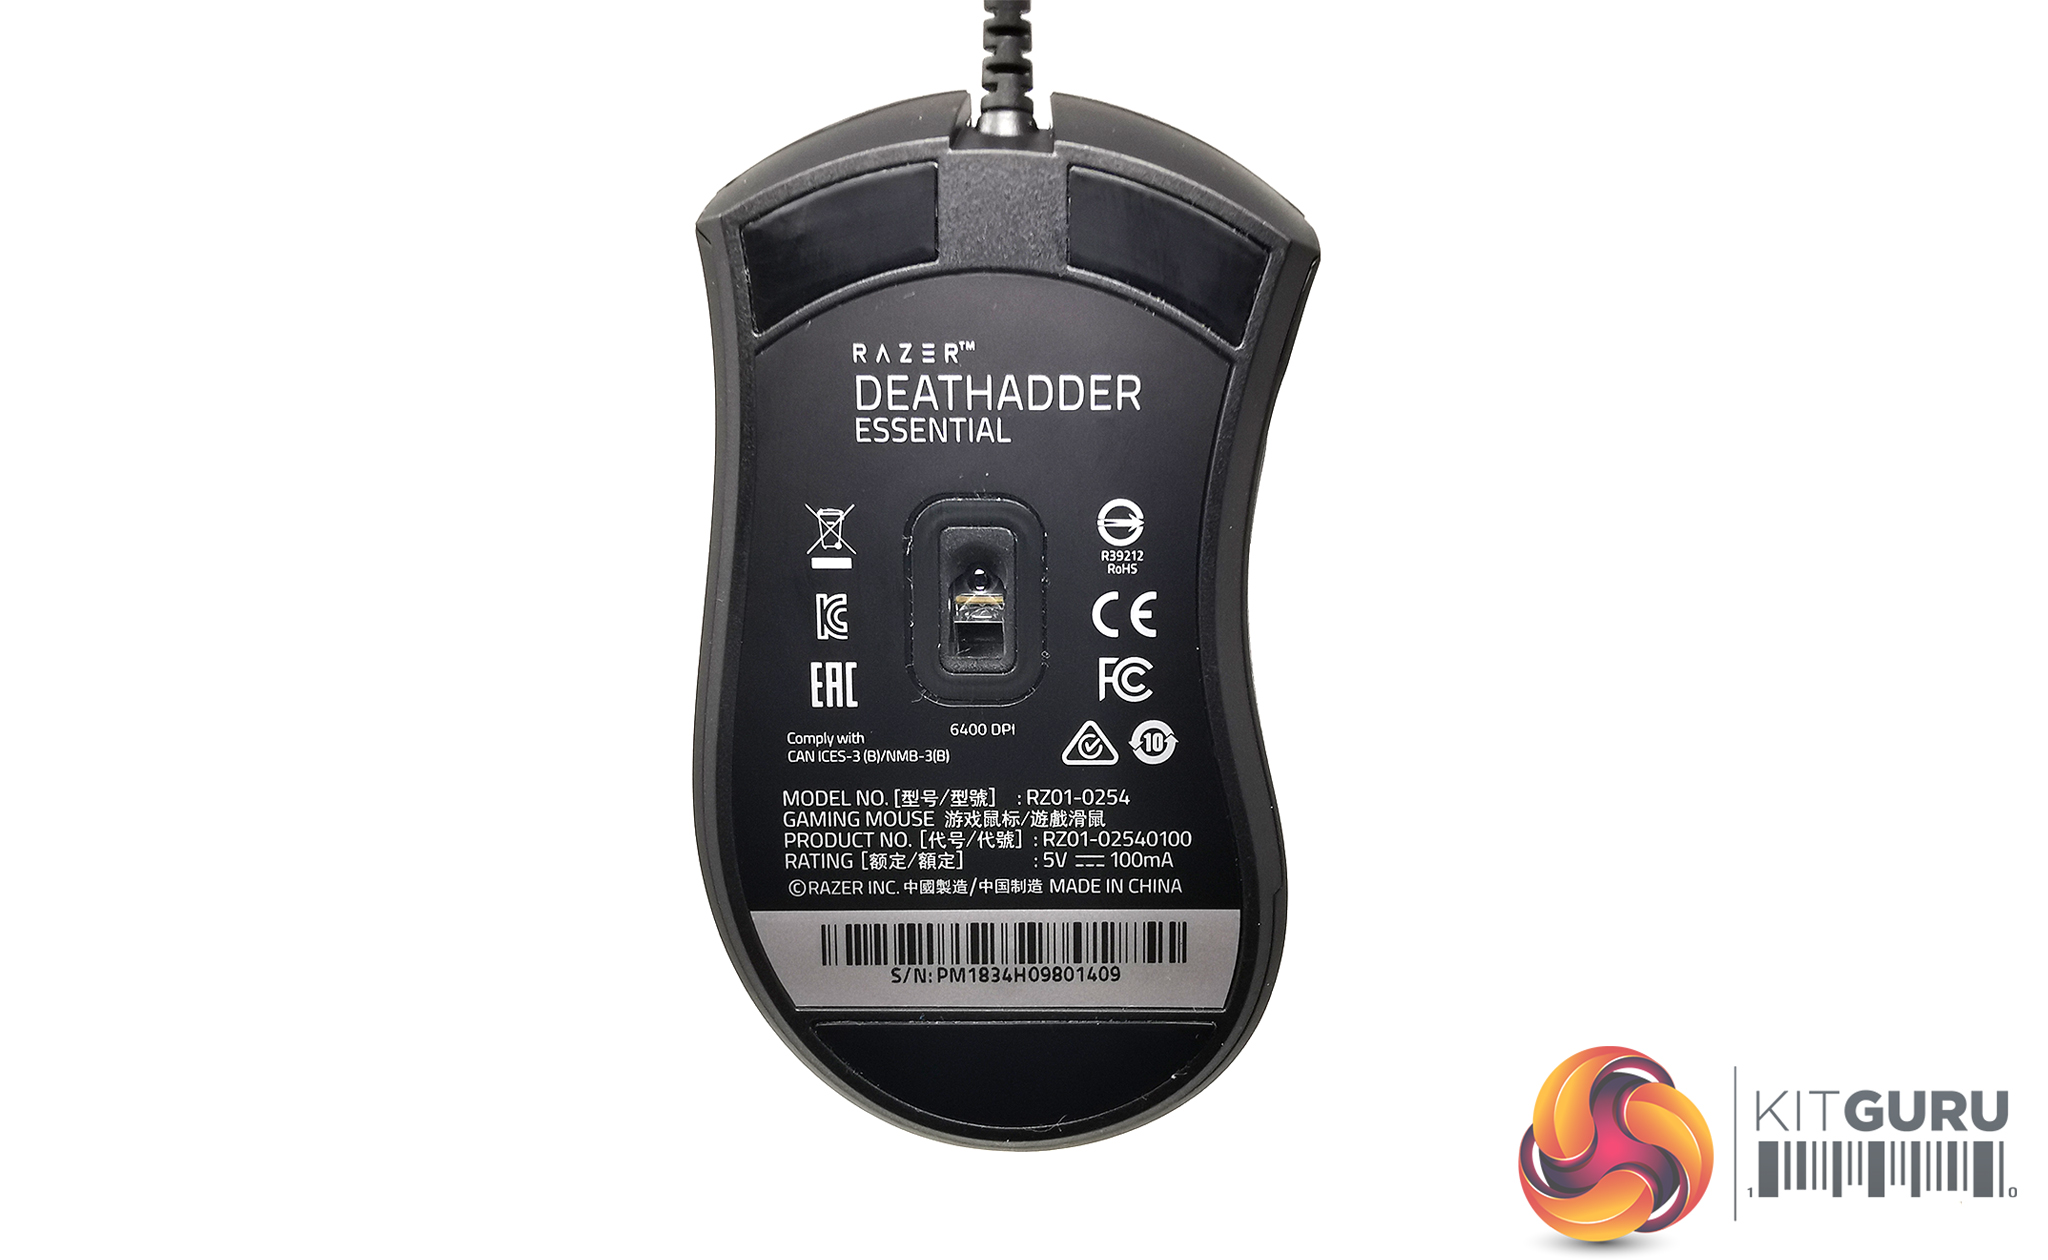 razer deathadder 2013 drivers without synapse